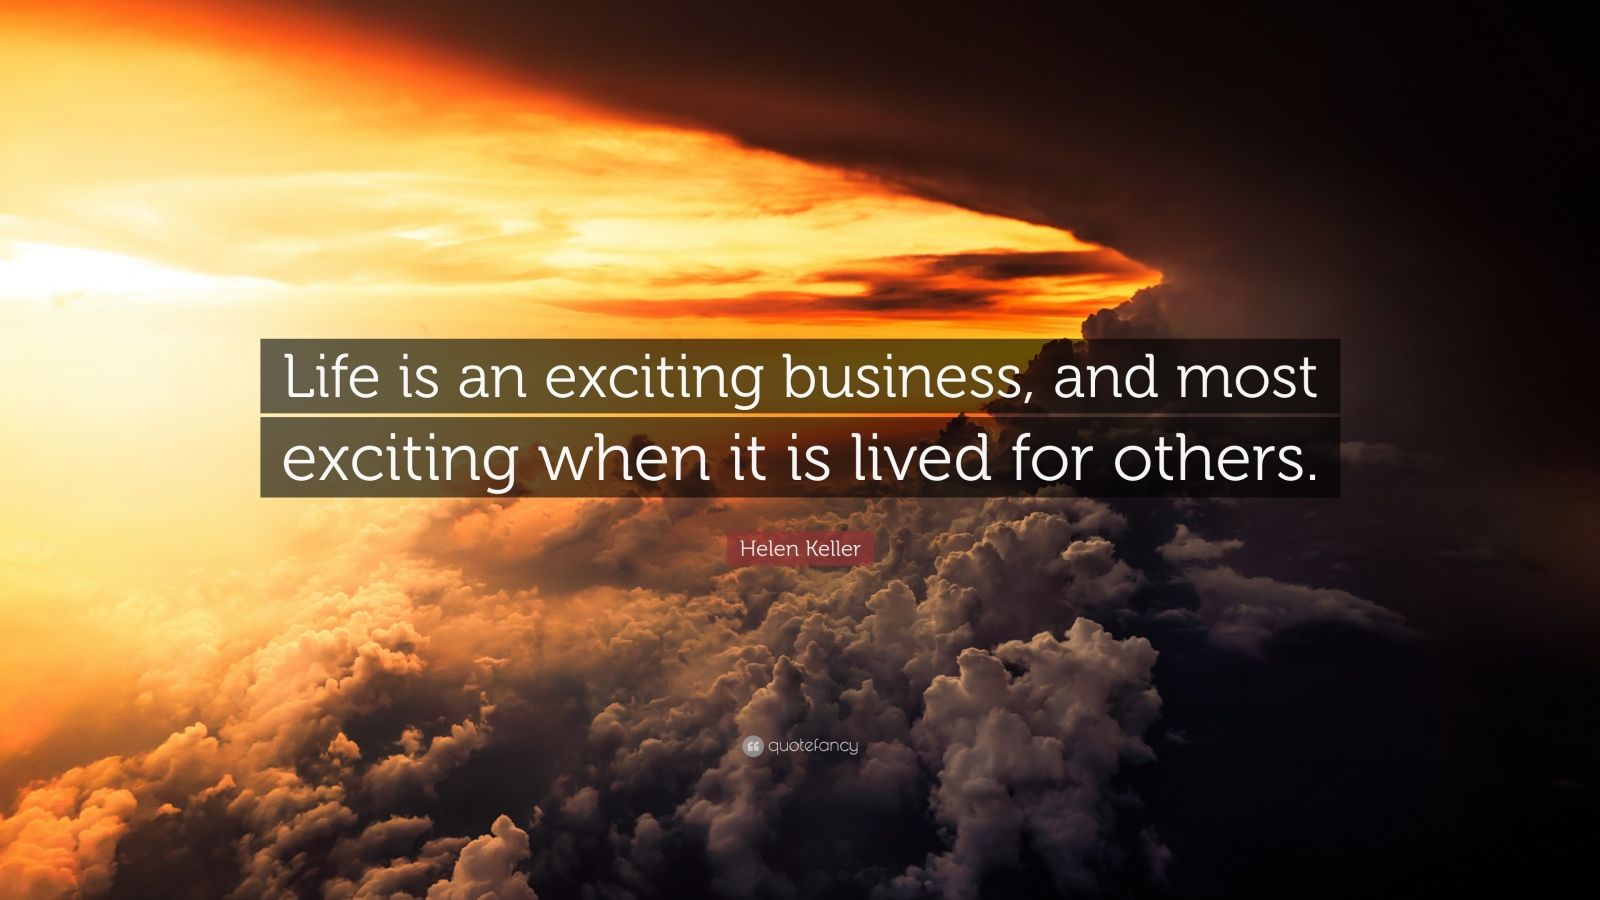 Helen Keller Quote: “Life is an exciting business, and most exciting